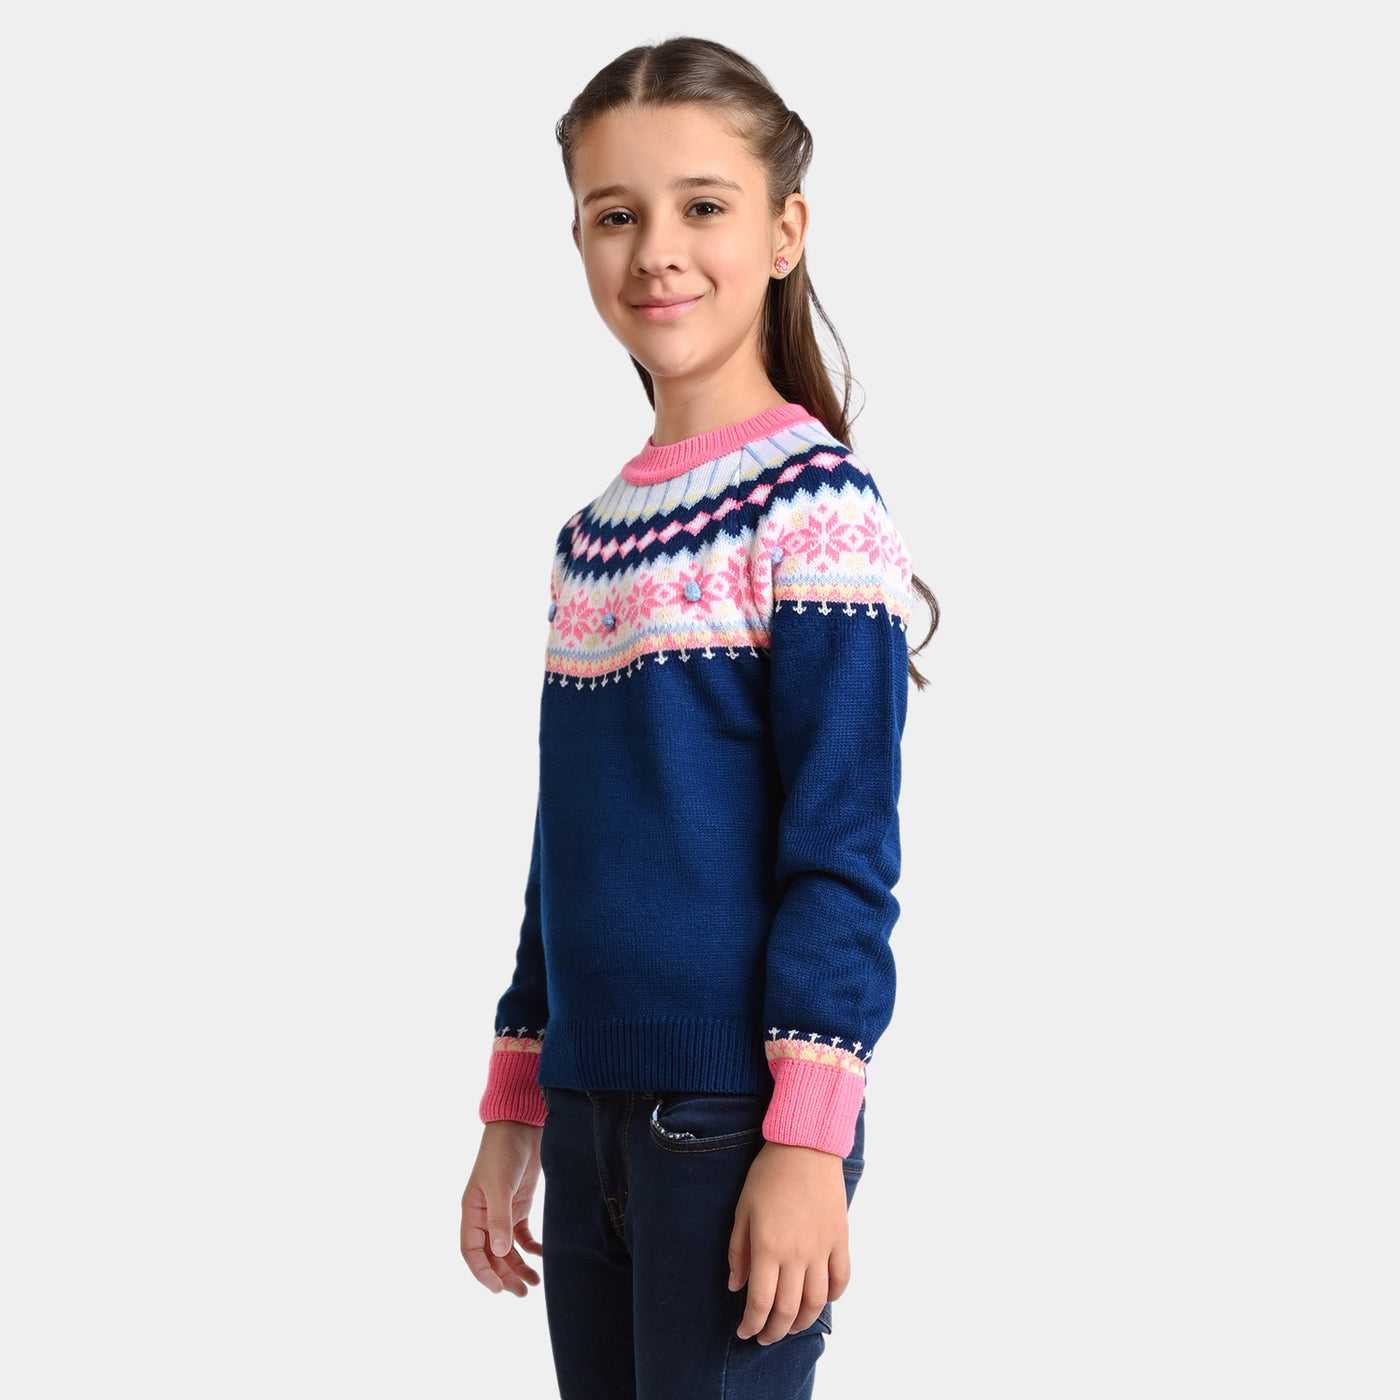 Girls Knitted Sweater -NAVY